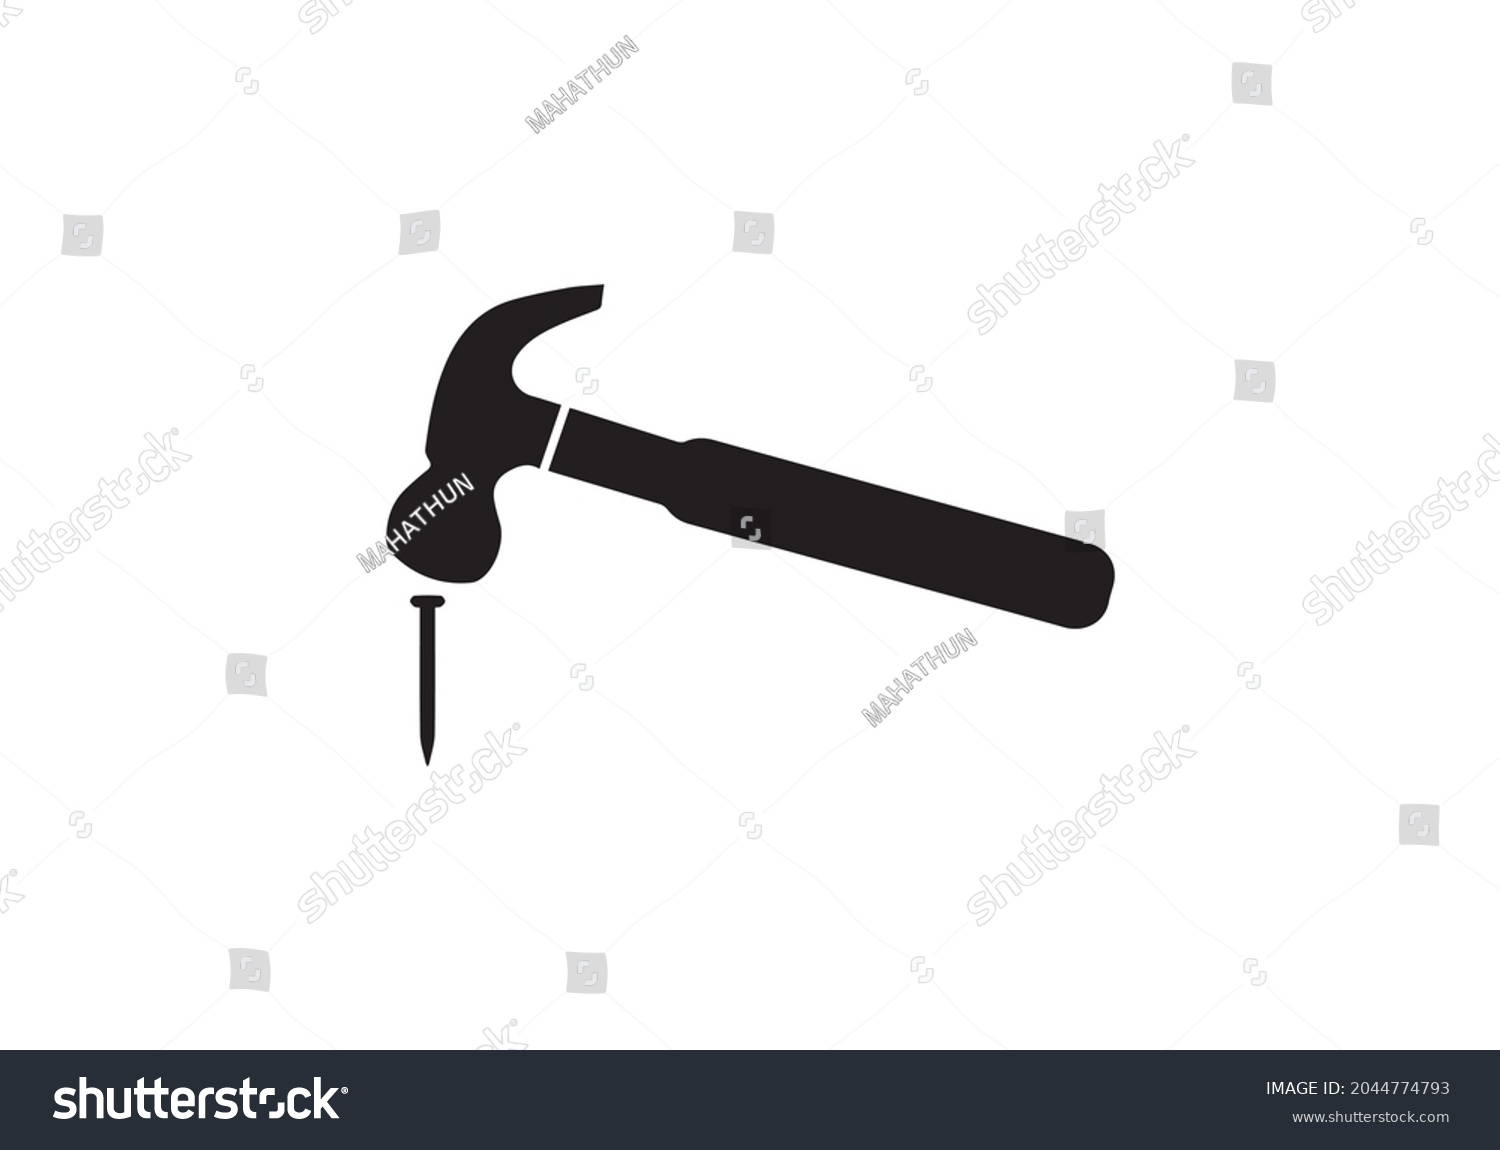 SVG of Hammer and nail icon vector illustration svg